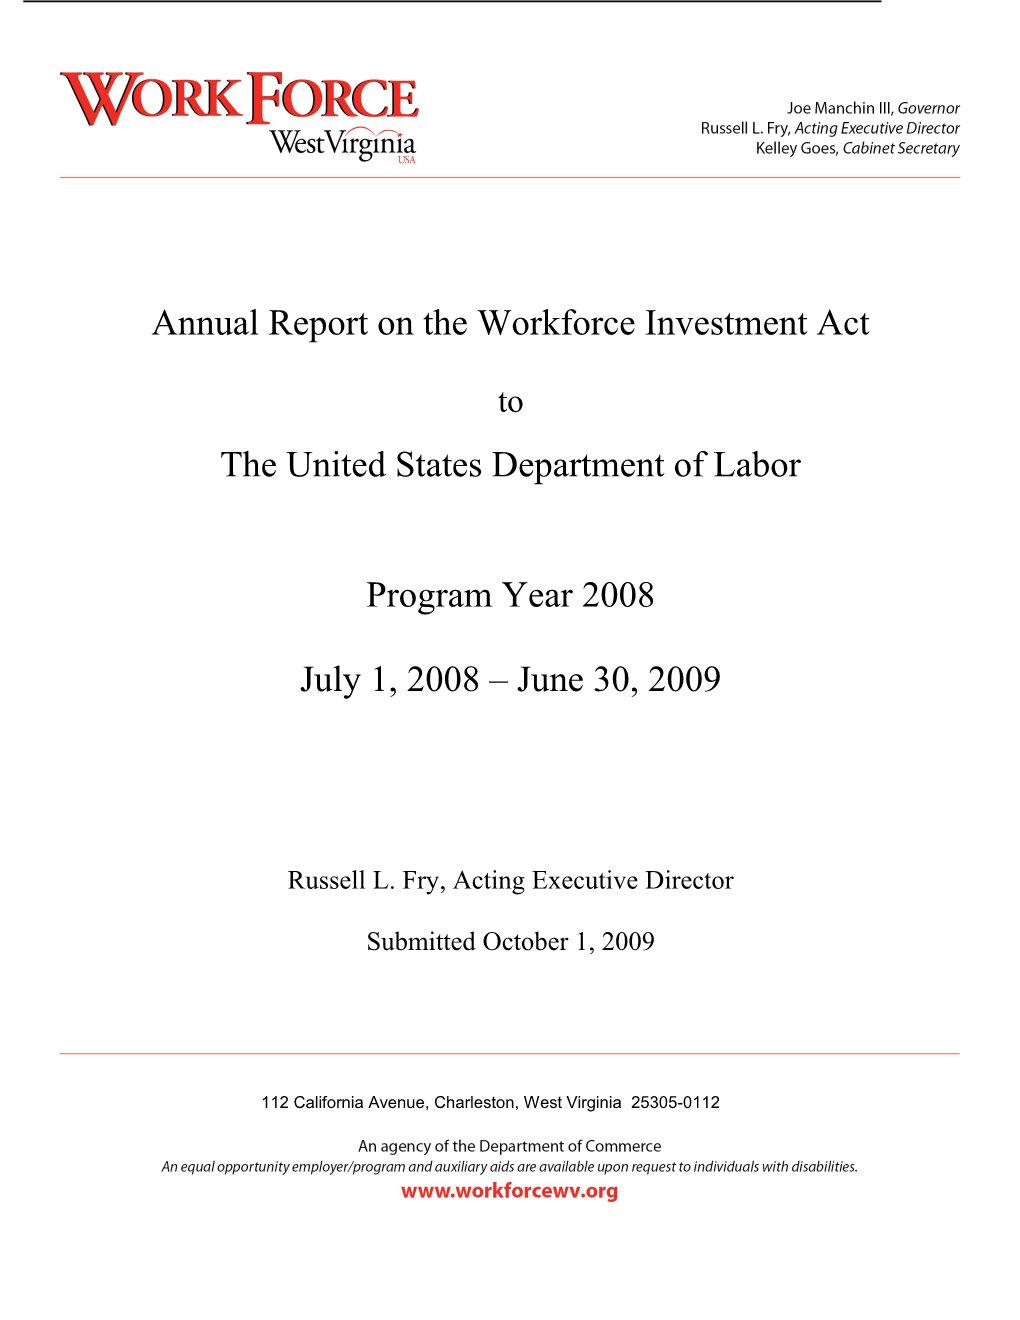 Annual Report on the Workforce Investment Act